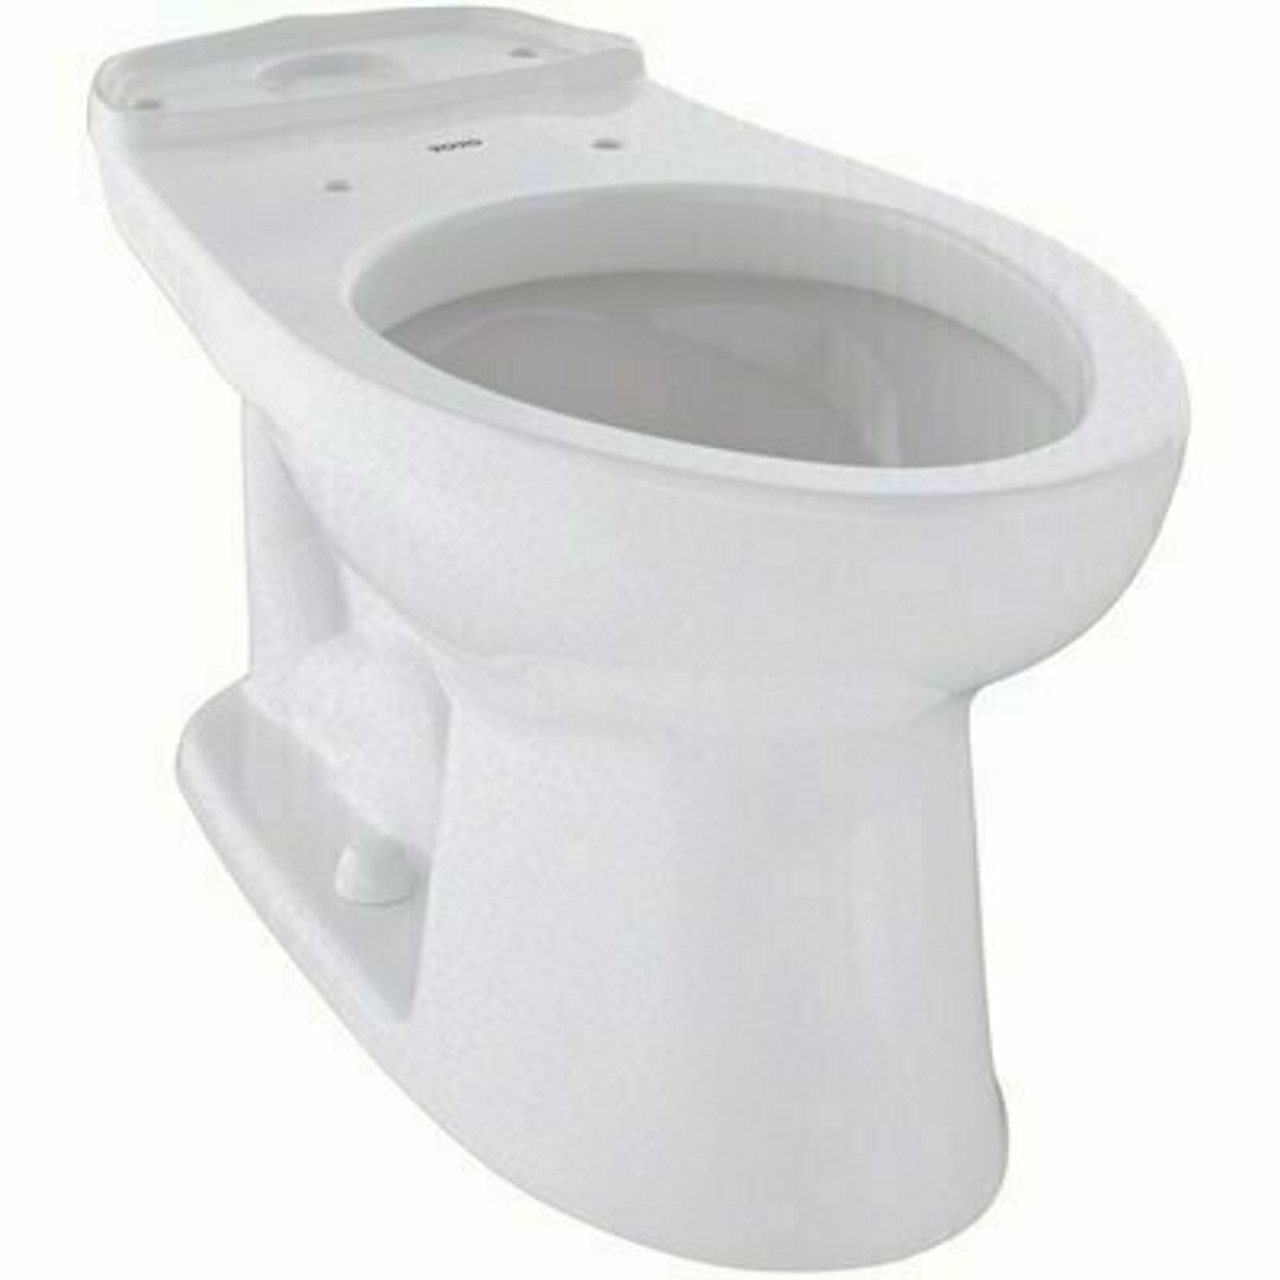 Toto Eco Drake Ada Compliant Elongated Toilet Bowl Only In Cotton White